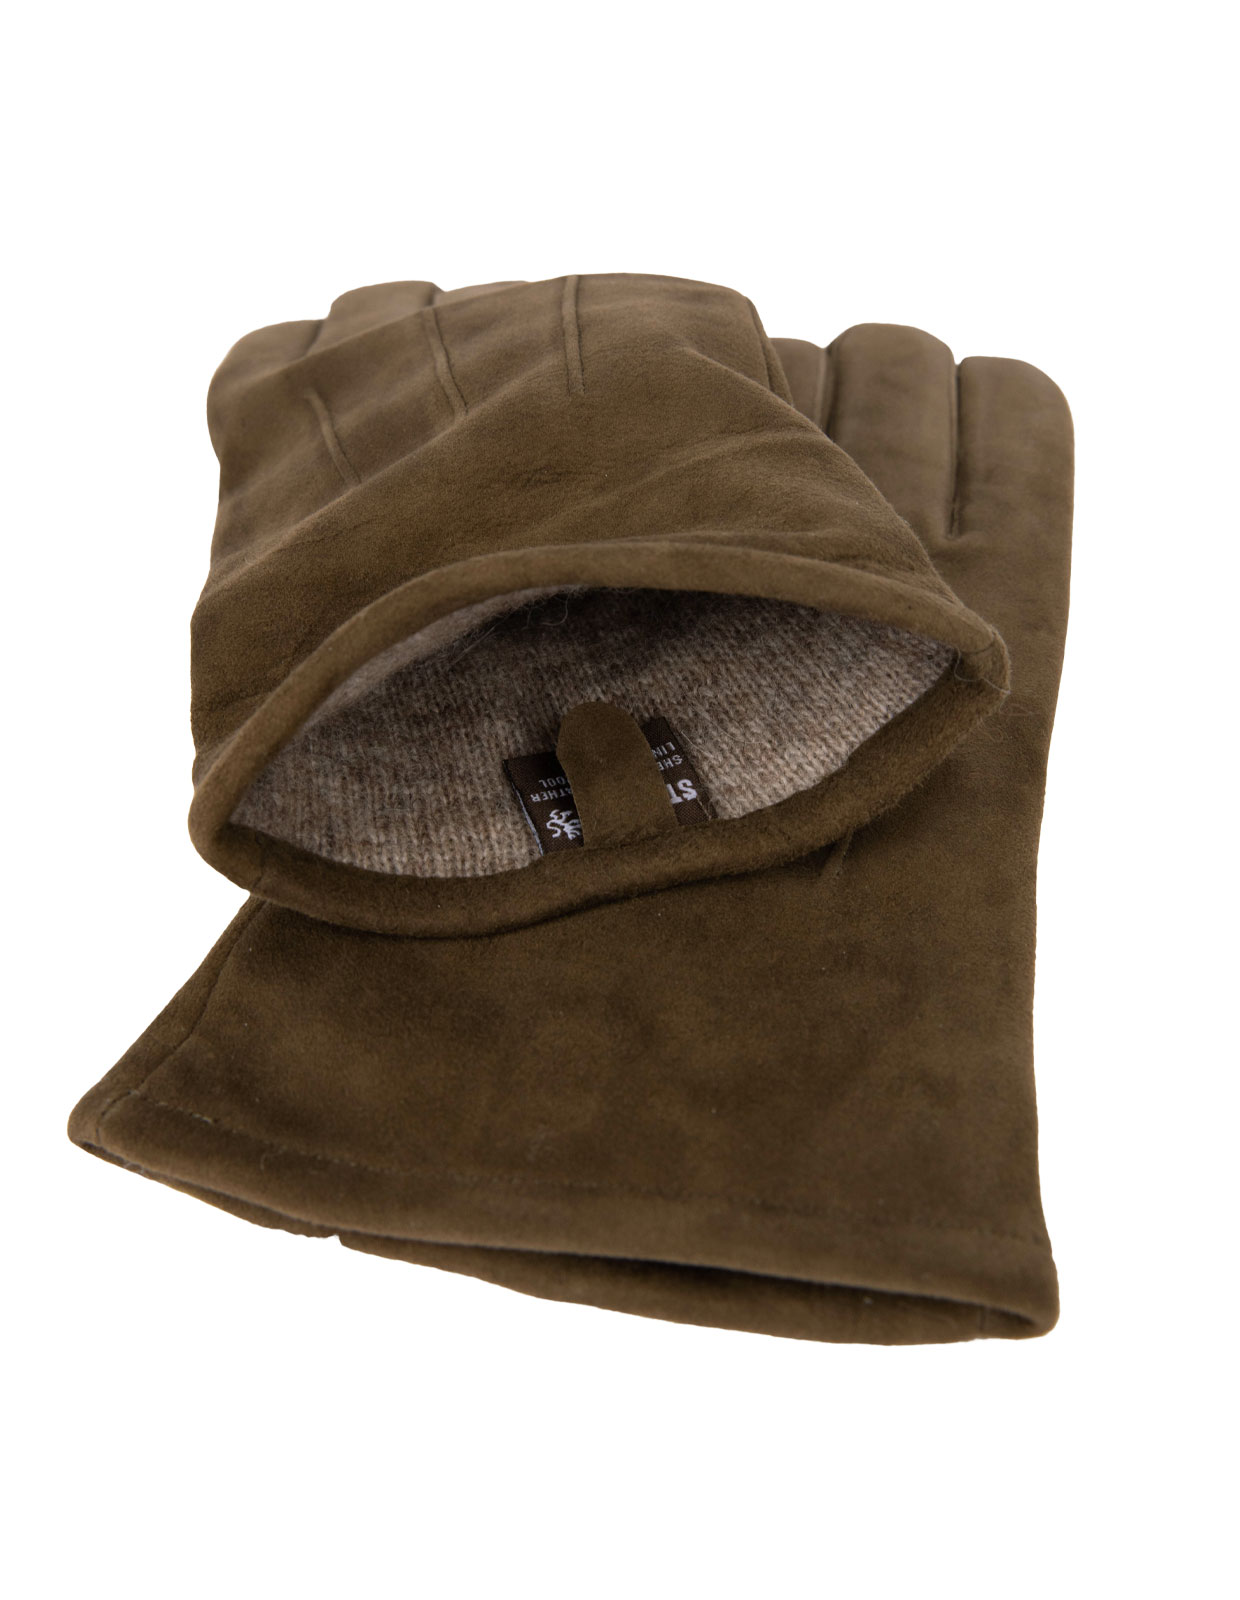 Classic Suede Gloves Olive Green Stl 7.5